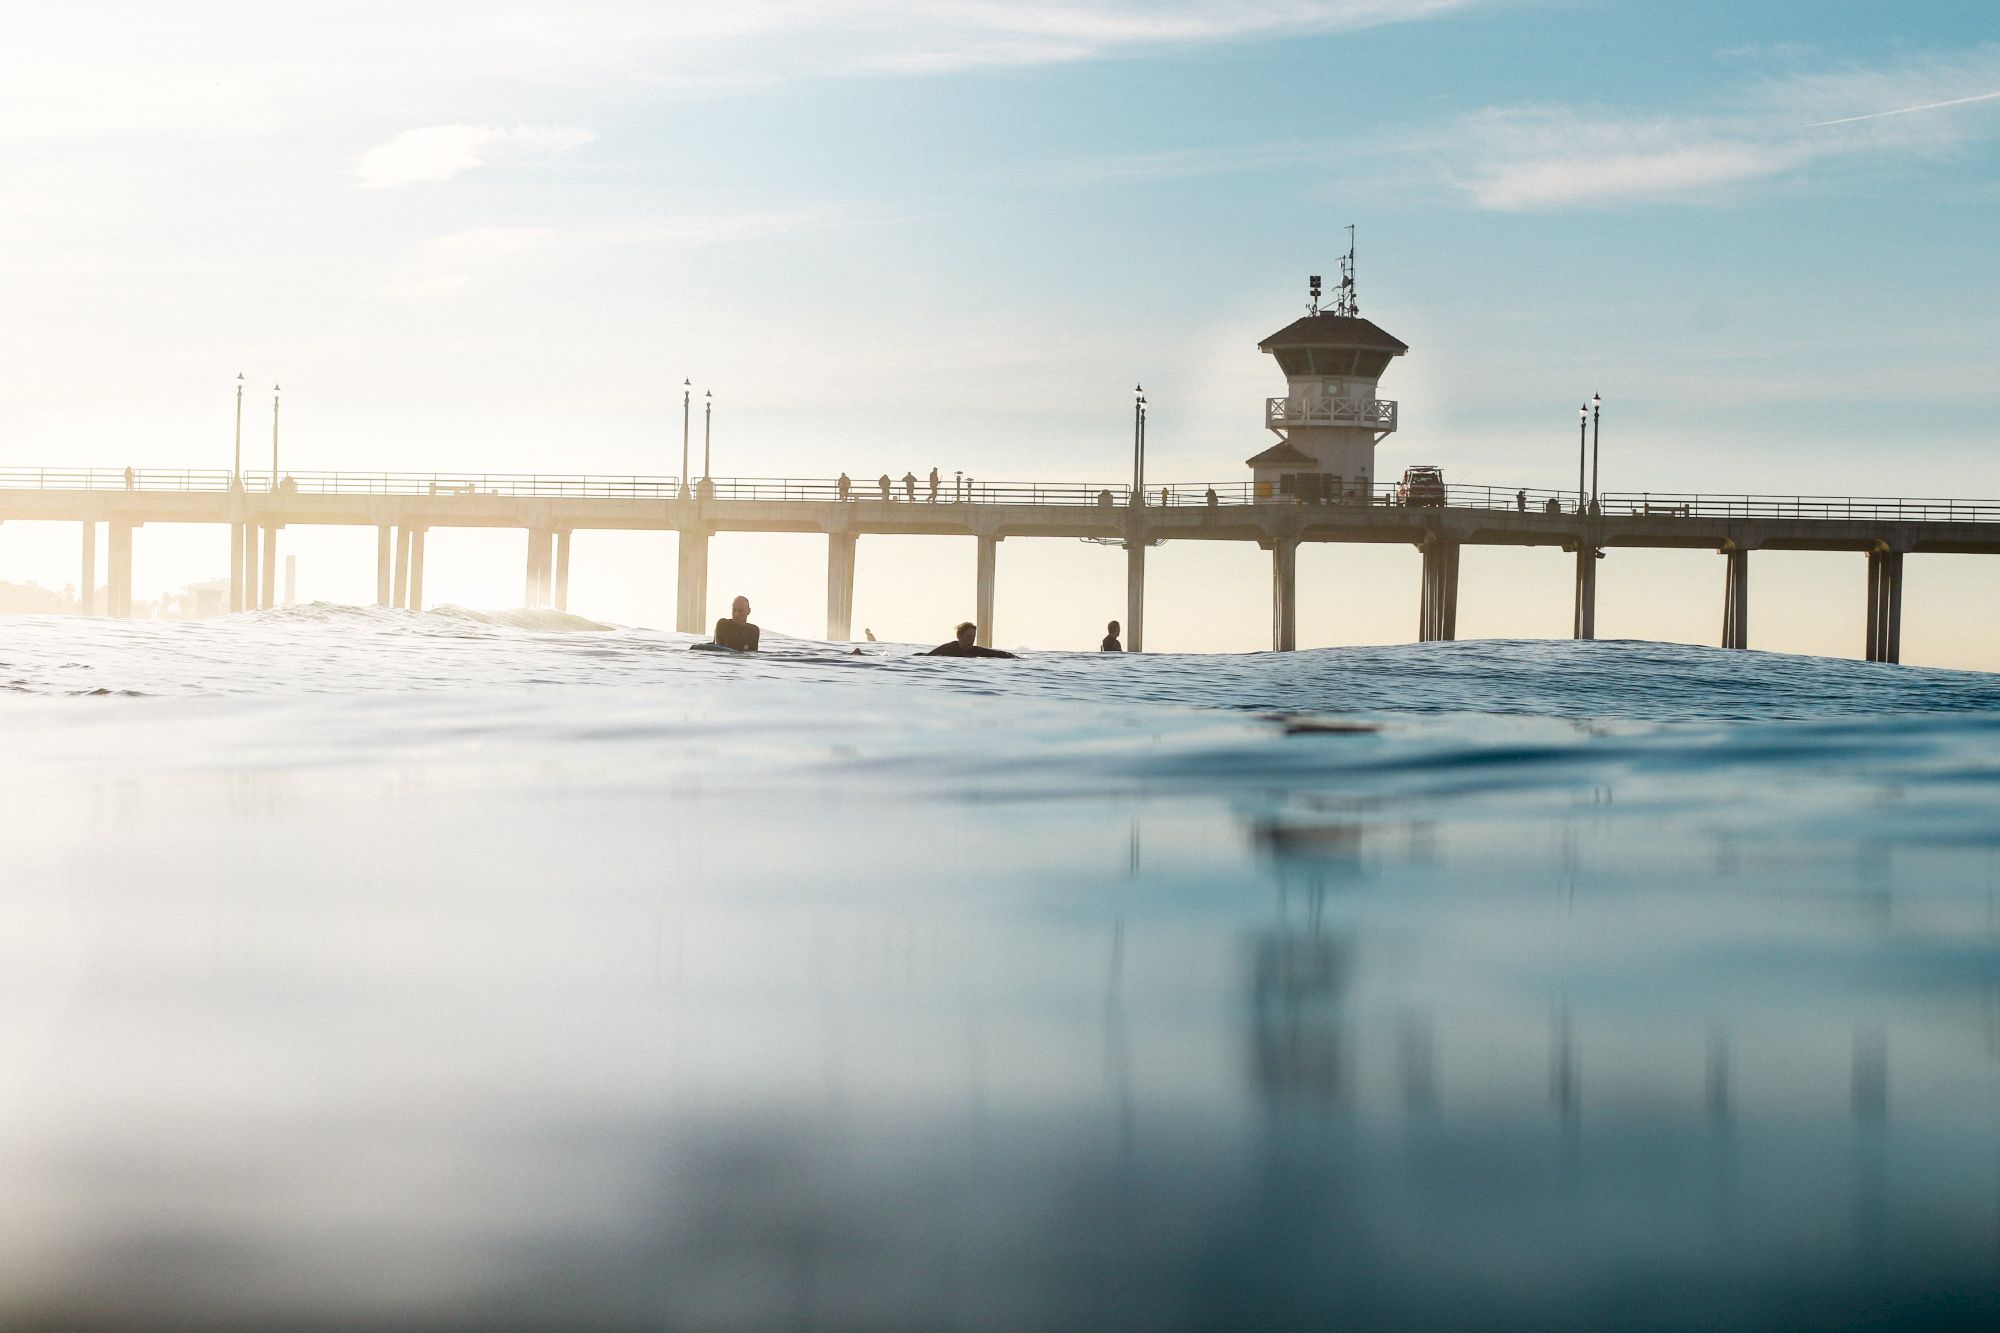 A view of a pier extending over the ocean, with a few surfers in the water and people walking on the pier in the background.